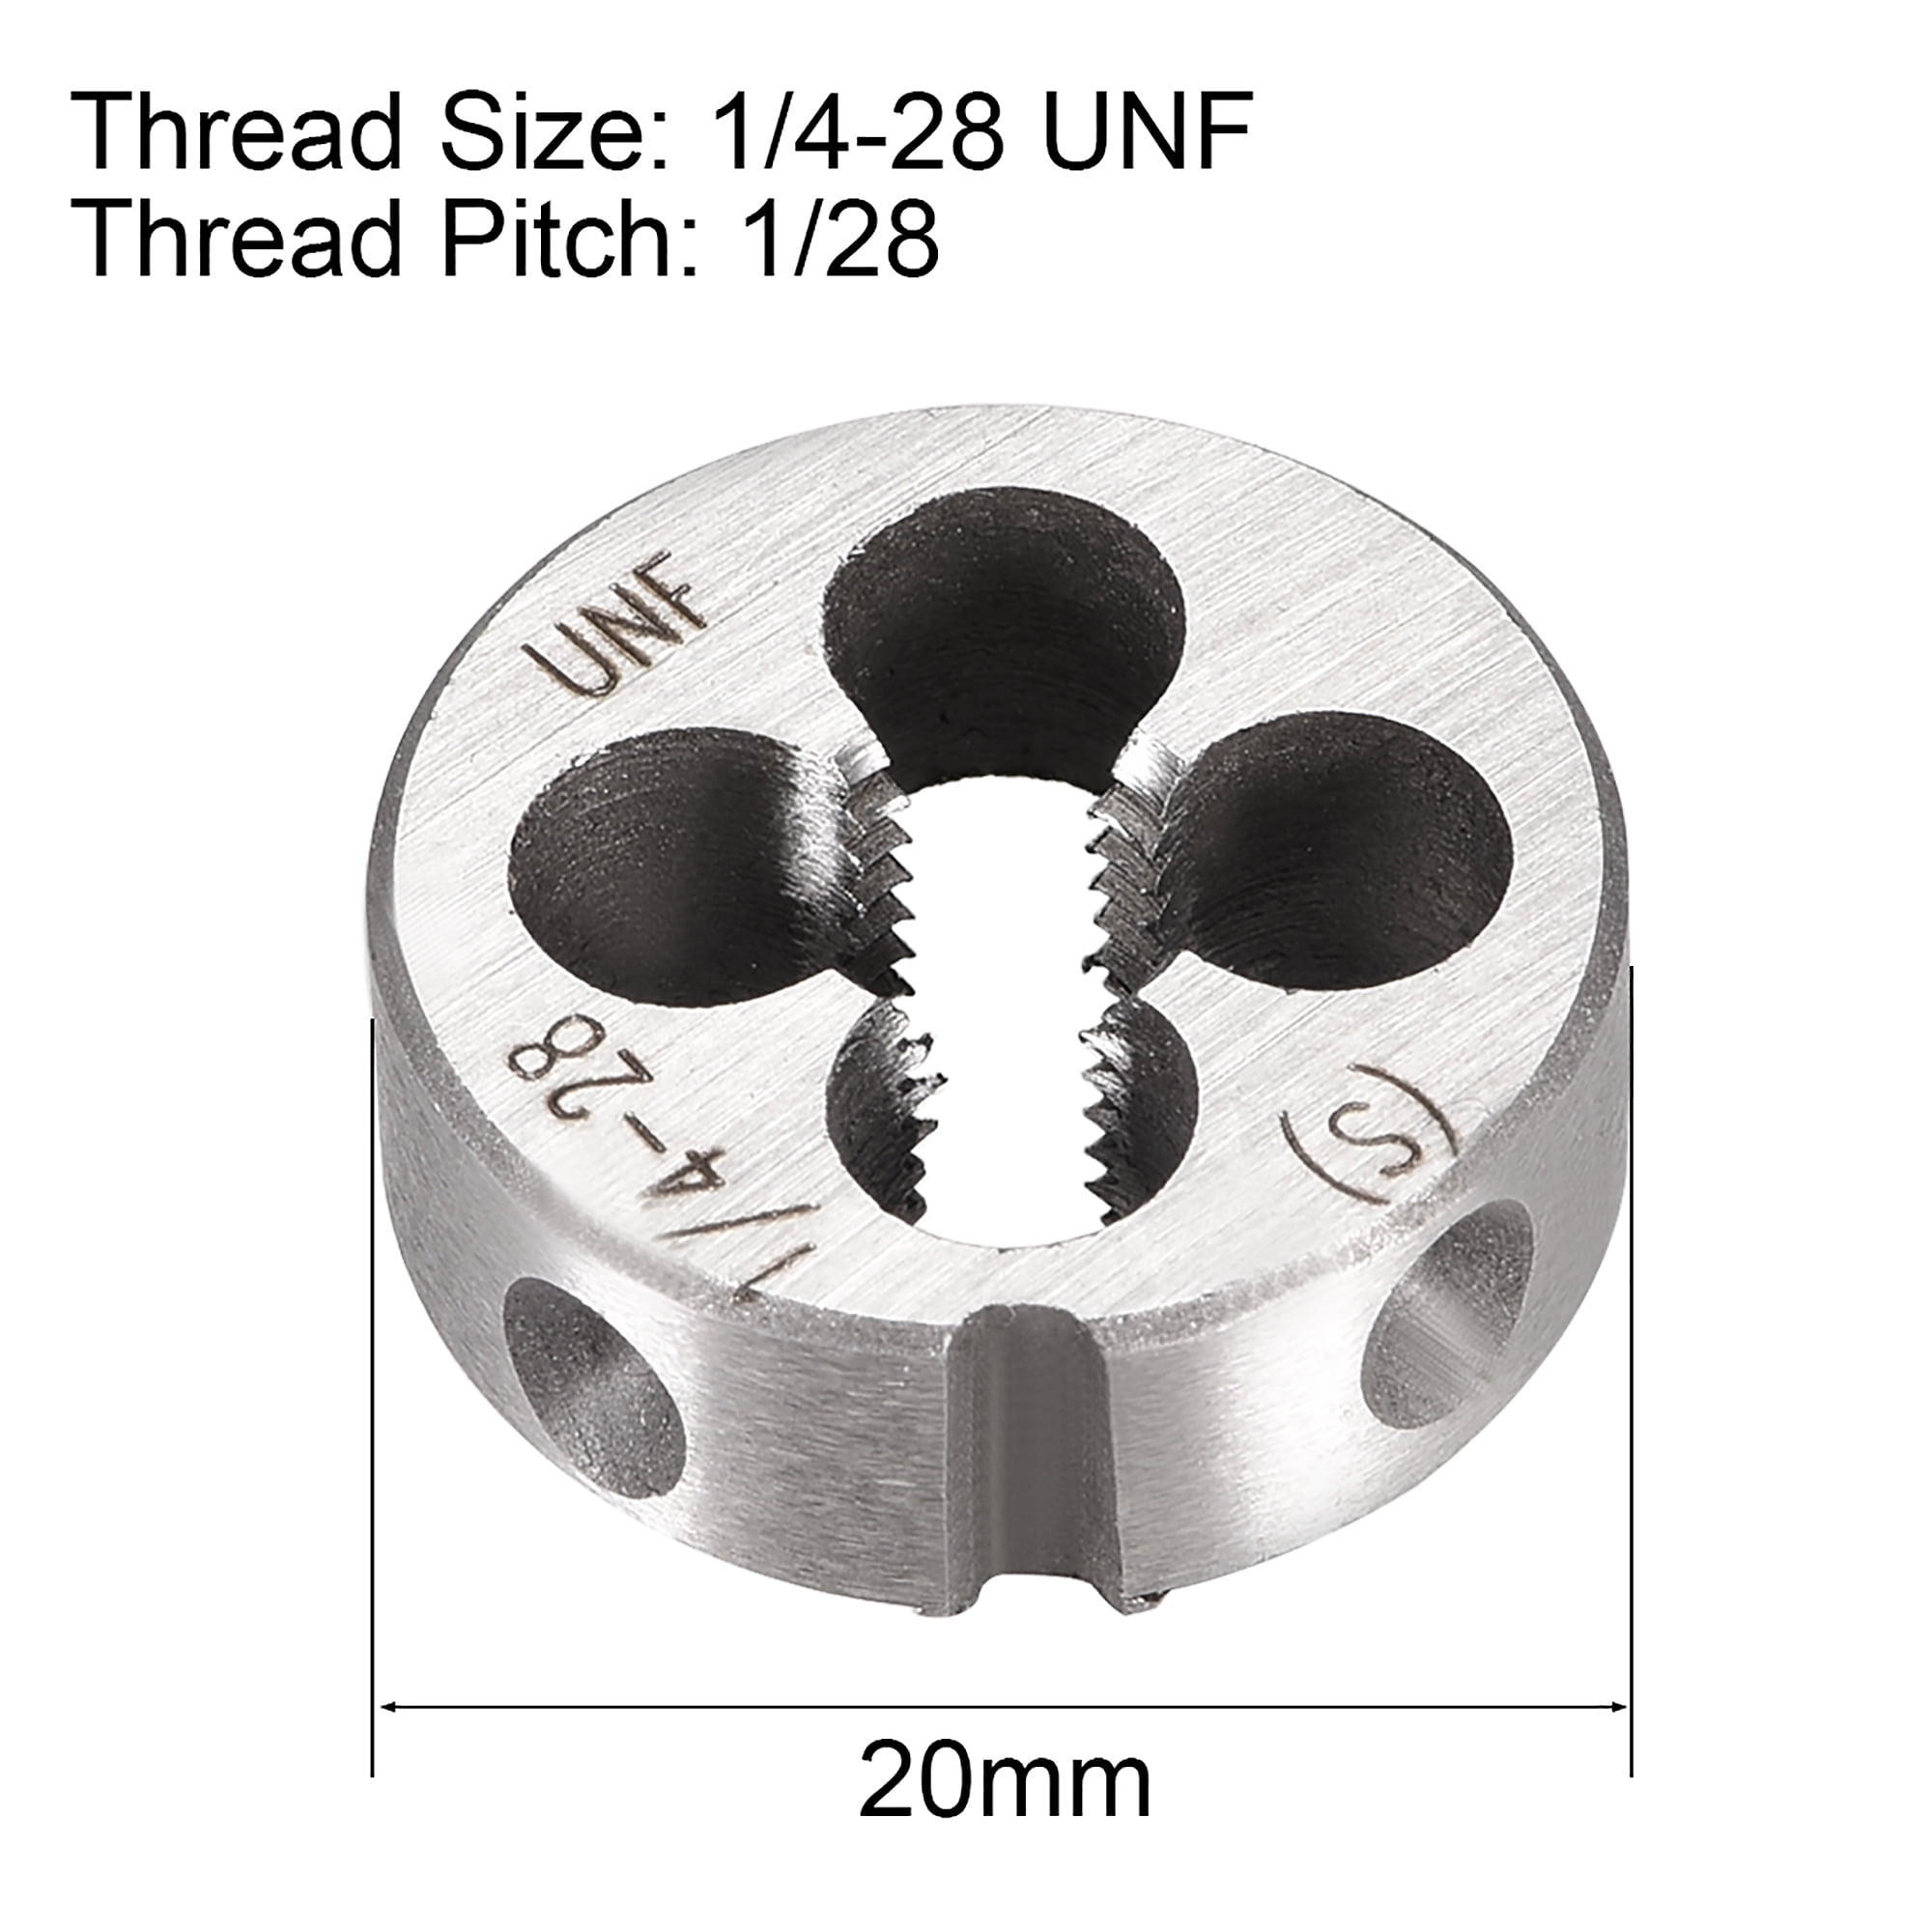 Sell in lot of 2 1/2-13 UNC and 1/2-20 UNF Hex Thread Repair Die 